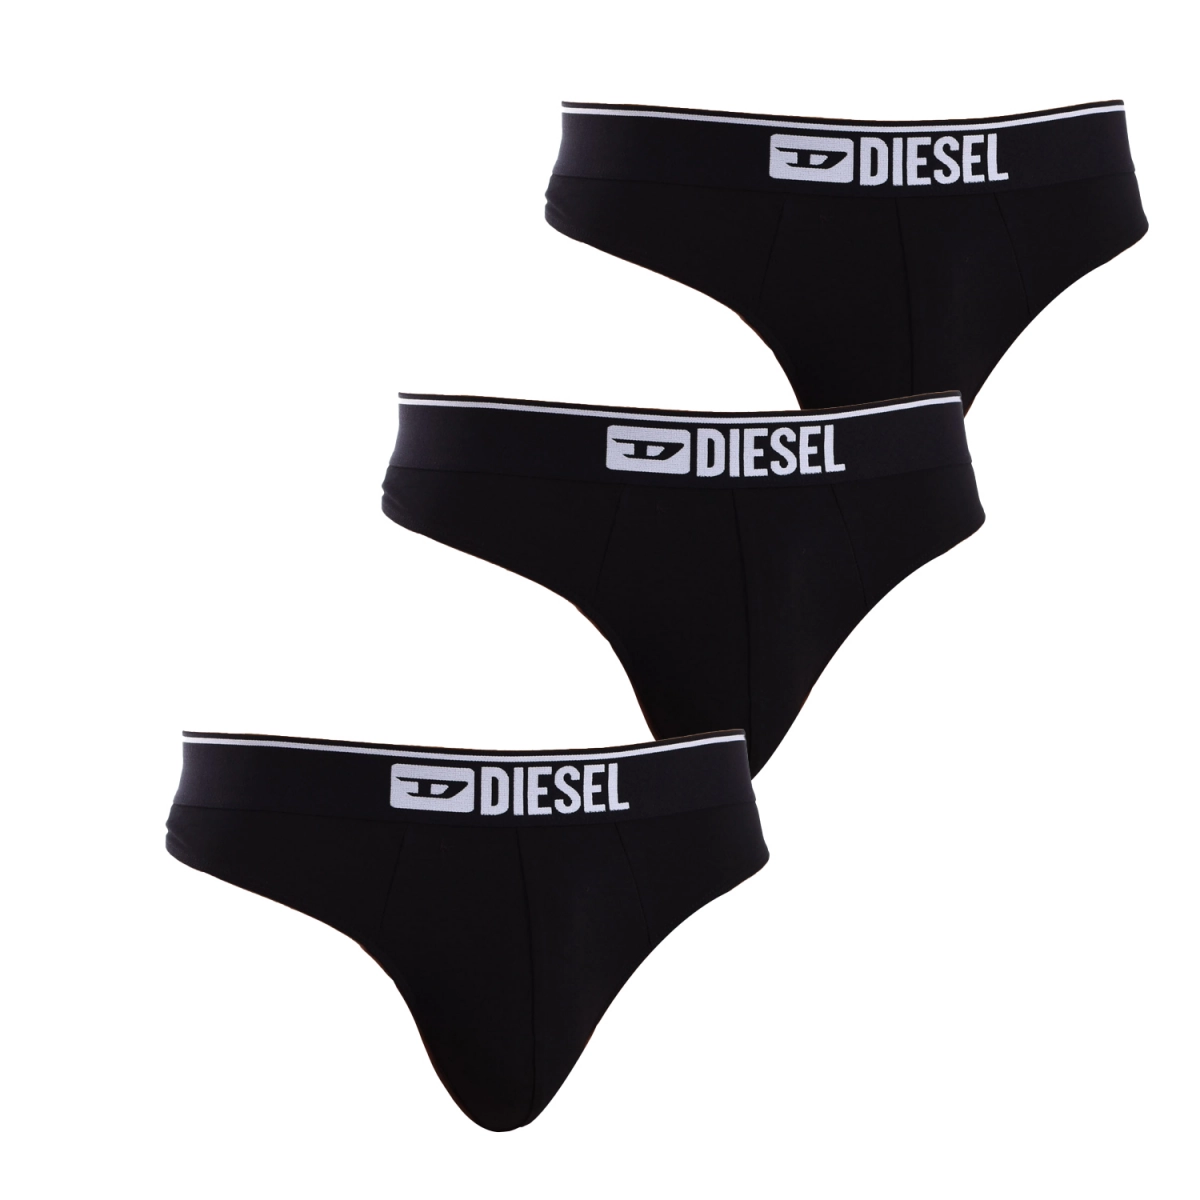 Pack-3 Tangas Cotton Stretch Diesel 00SCWR-0GDAC hombre Talla: S Color: Negro 00SCWR-0GDAC-E4101.S